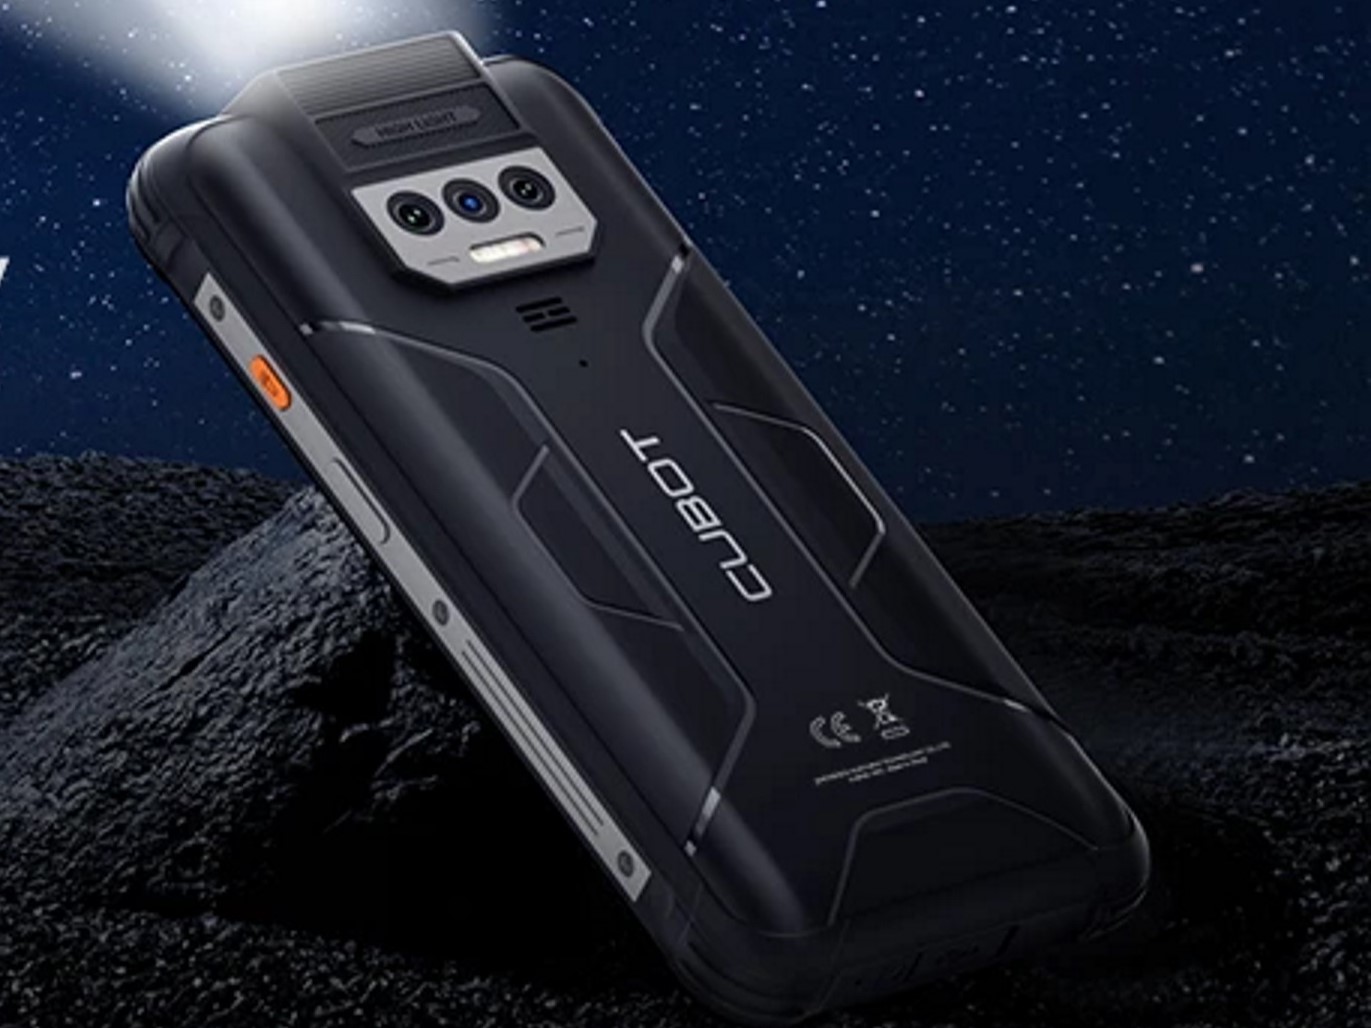 Cubot KingKong 8: New rugged smartphone launches with bright